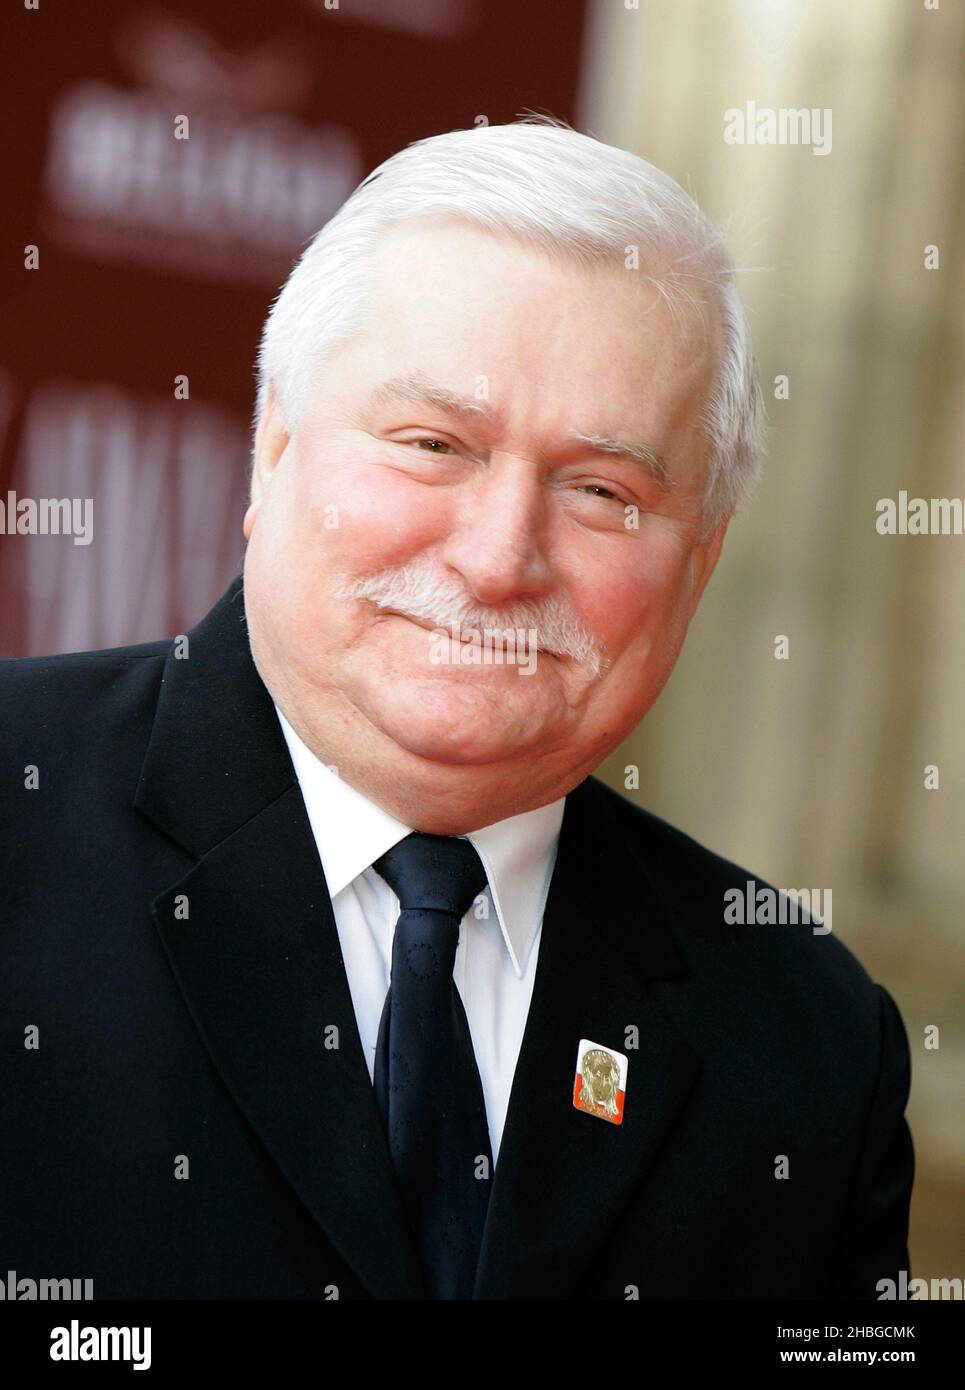 Lech Walesa arrives at Mikhail Gorbachev's 80th Birthday Gala at the Royal Albert Hall in London on March 30,2011. Stock Photo